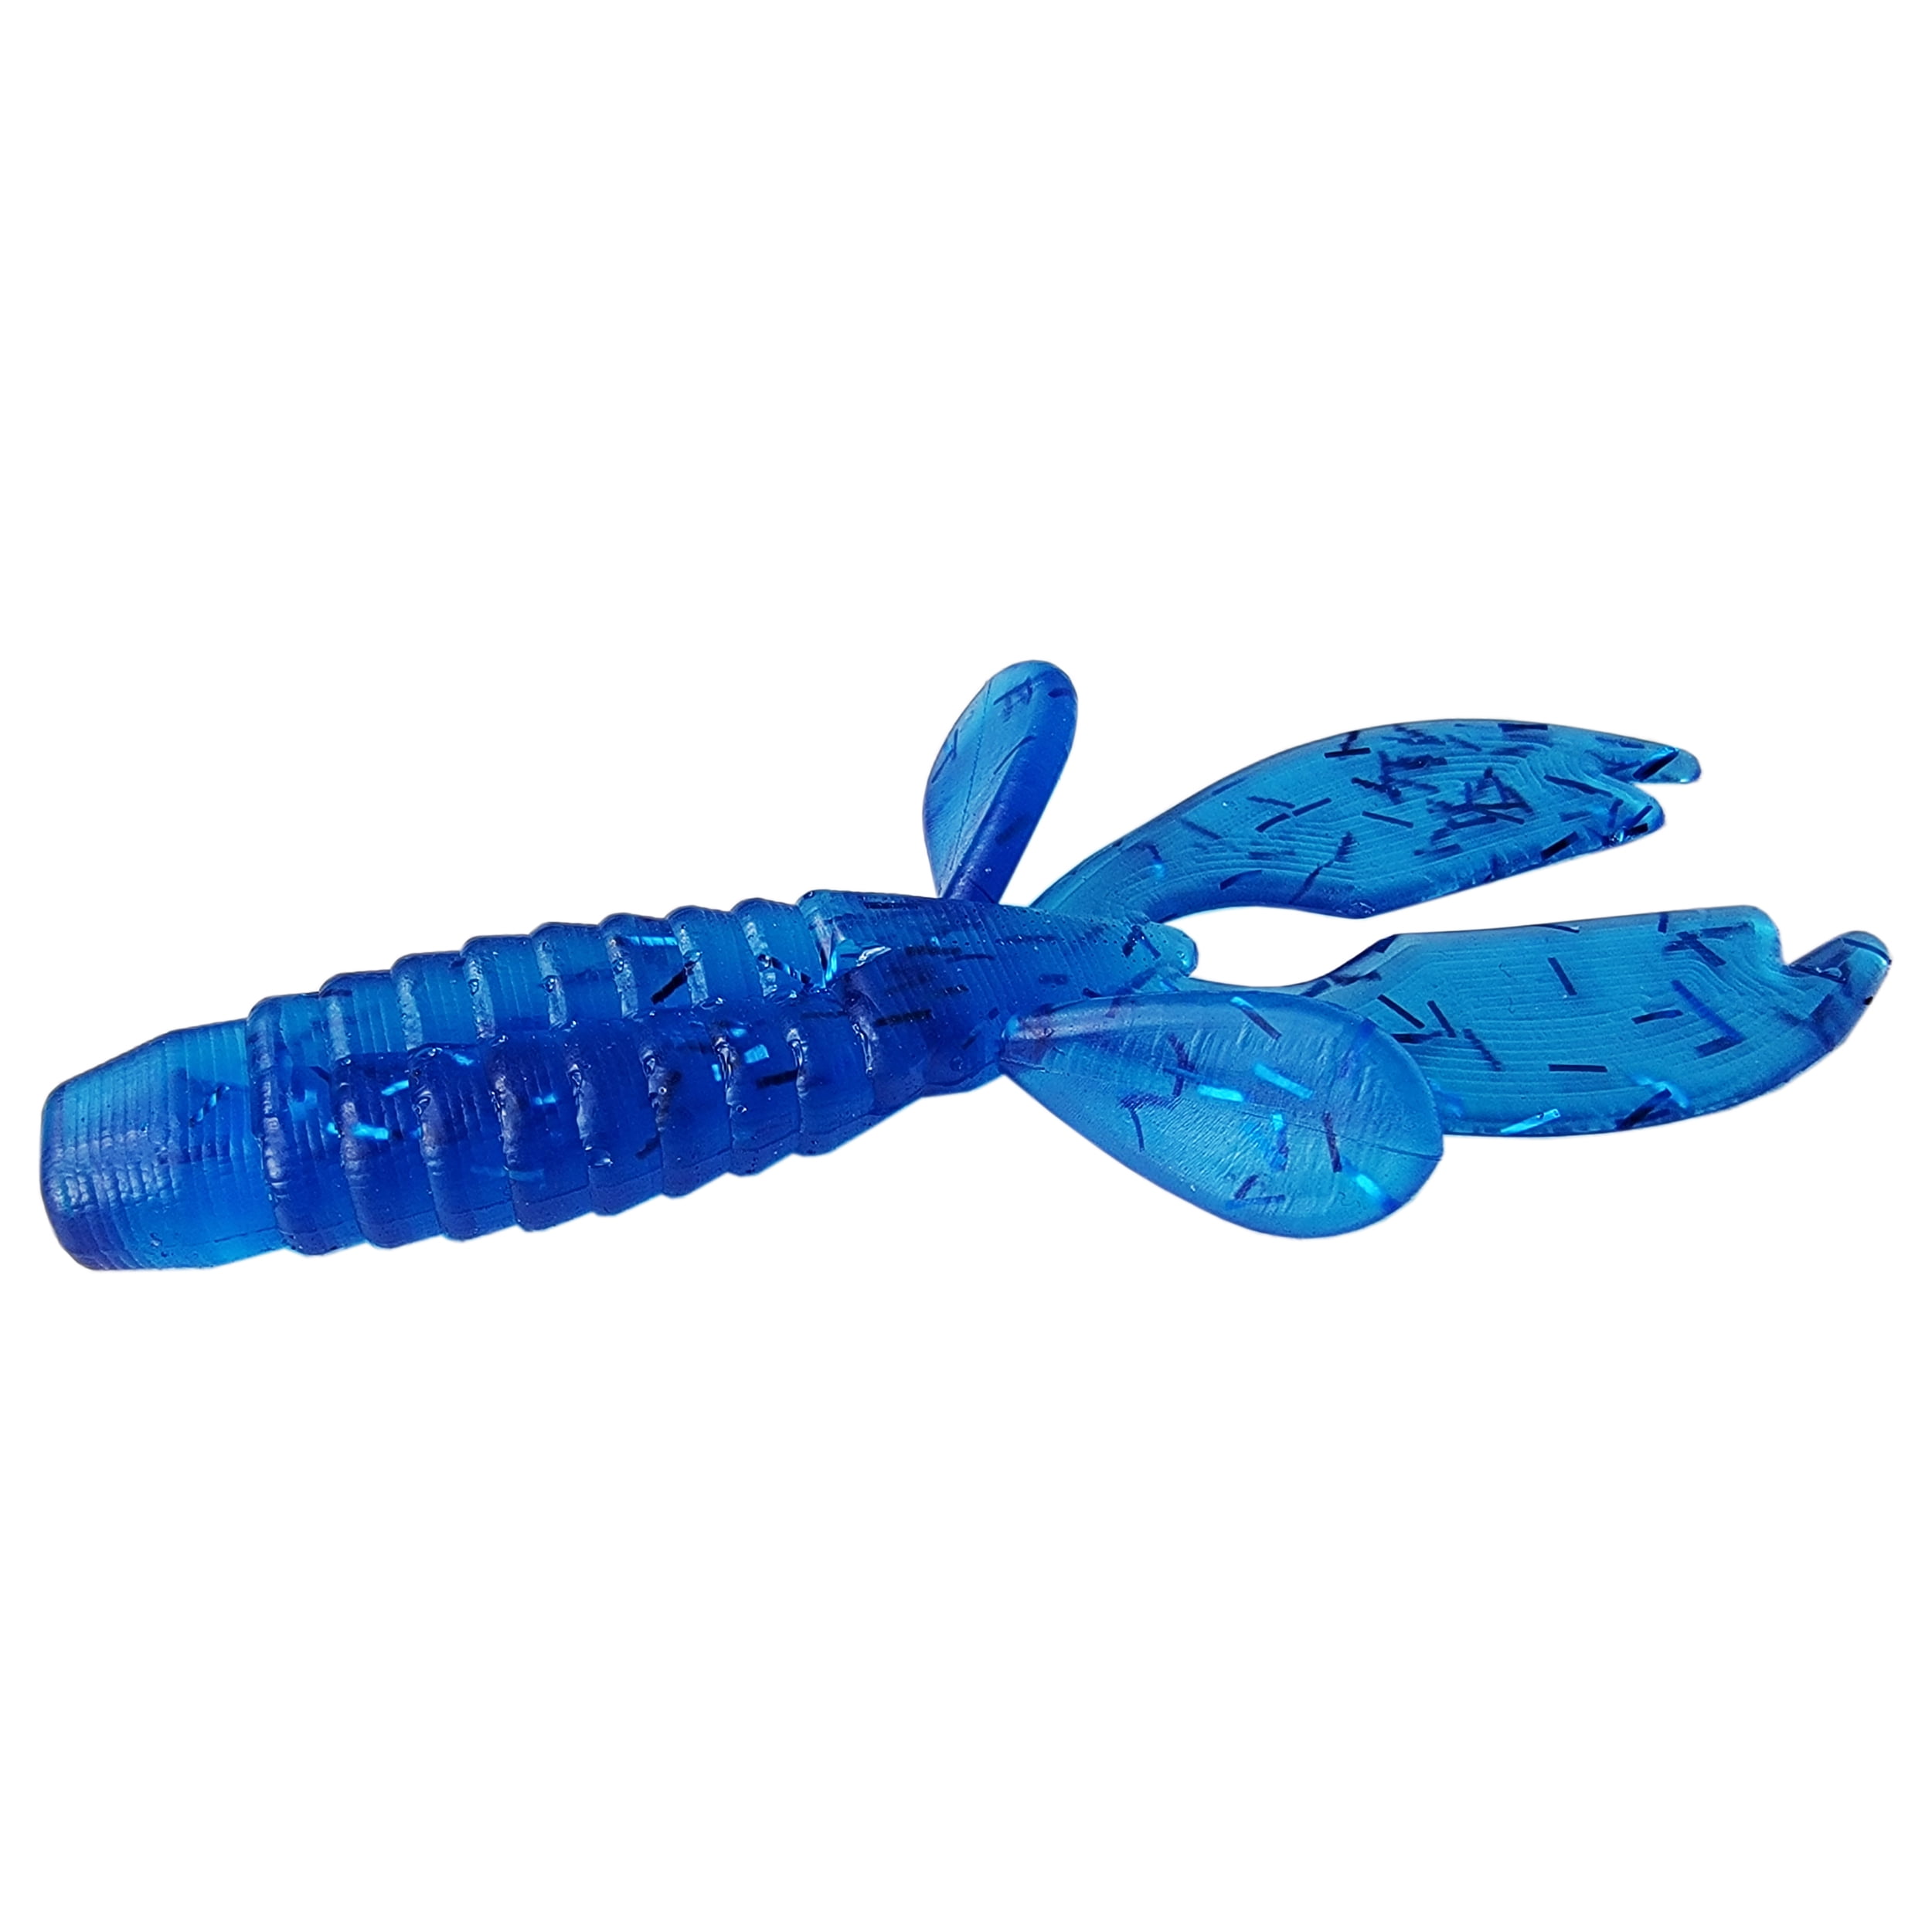 Tackle HD 10-Pack Texas Craw Beaver, 4.25 Twin Tail Fishing Bait, Soft  Plastic Fishing Lures and Jig Trailers for Bass Fishing, Crawfish Bass  Lures